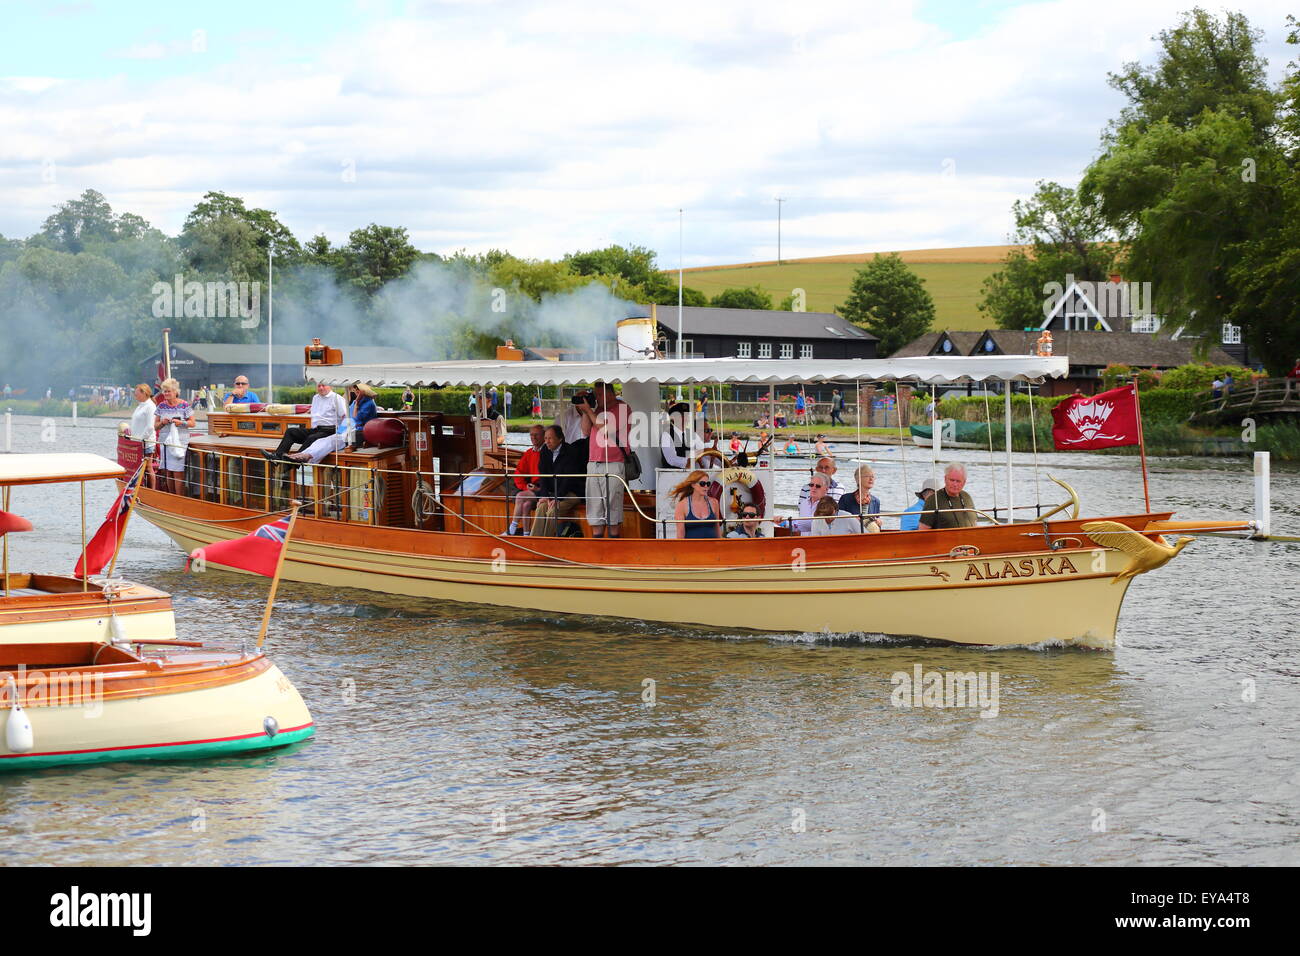 The Alaska steamer at the Henley Traditional Boat Festival 2015 Stock Photo